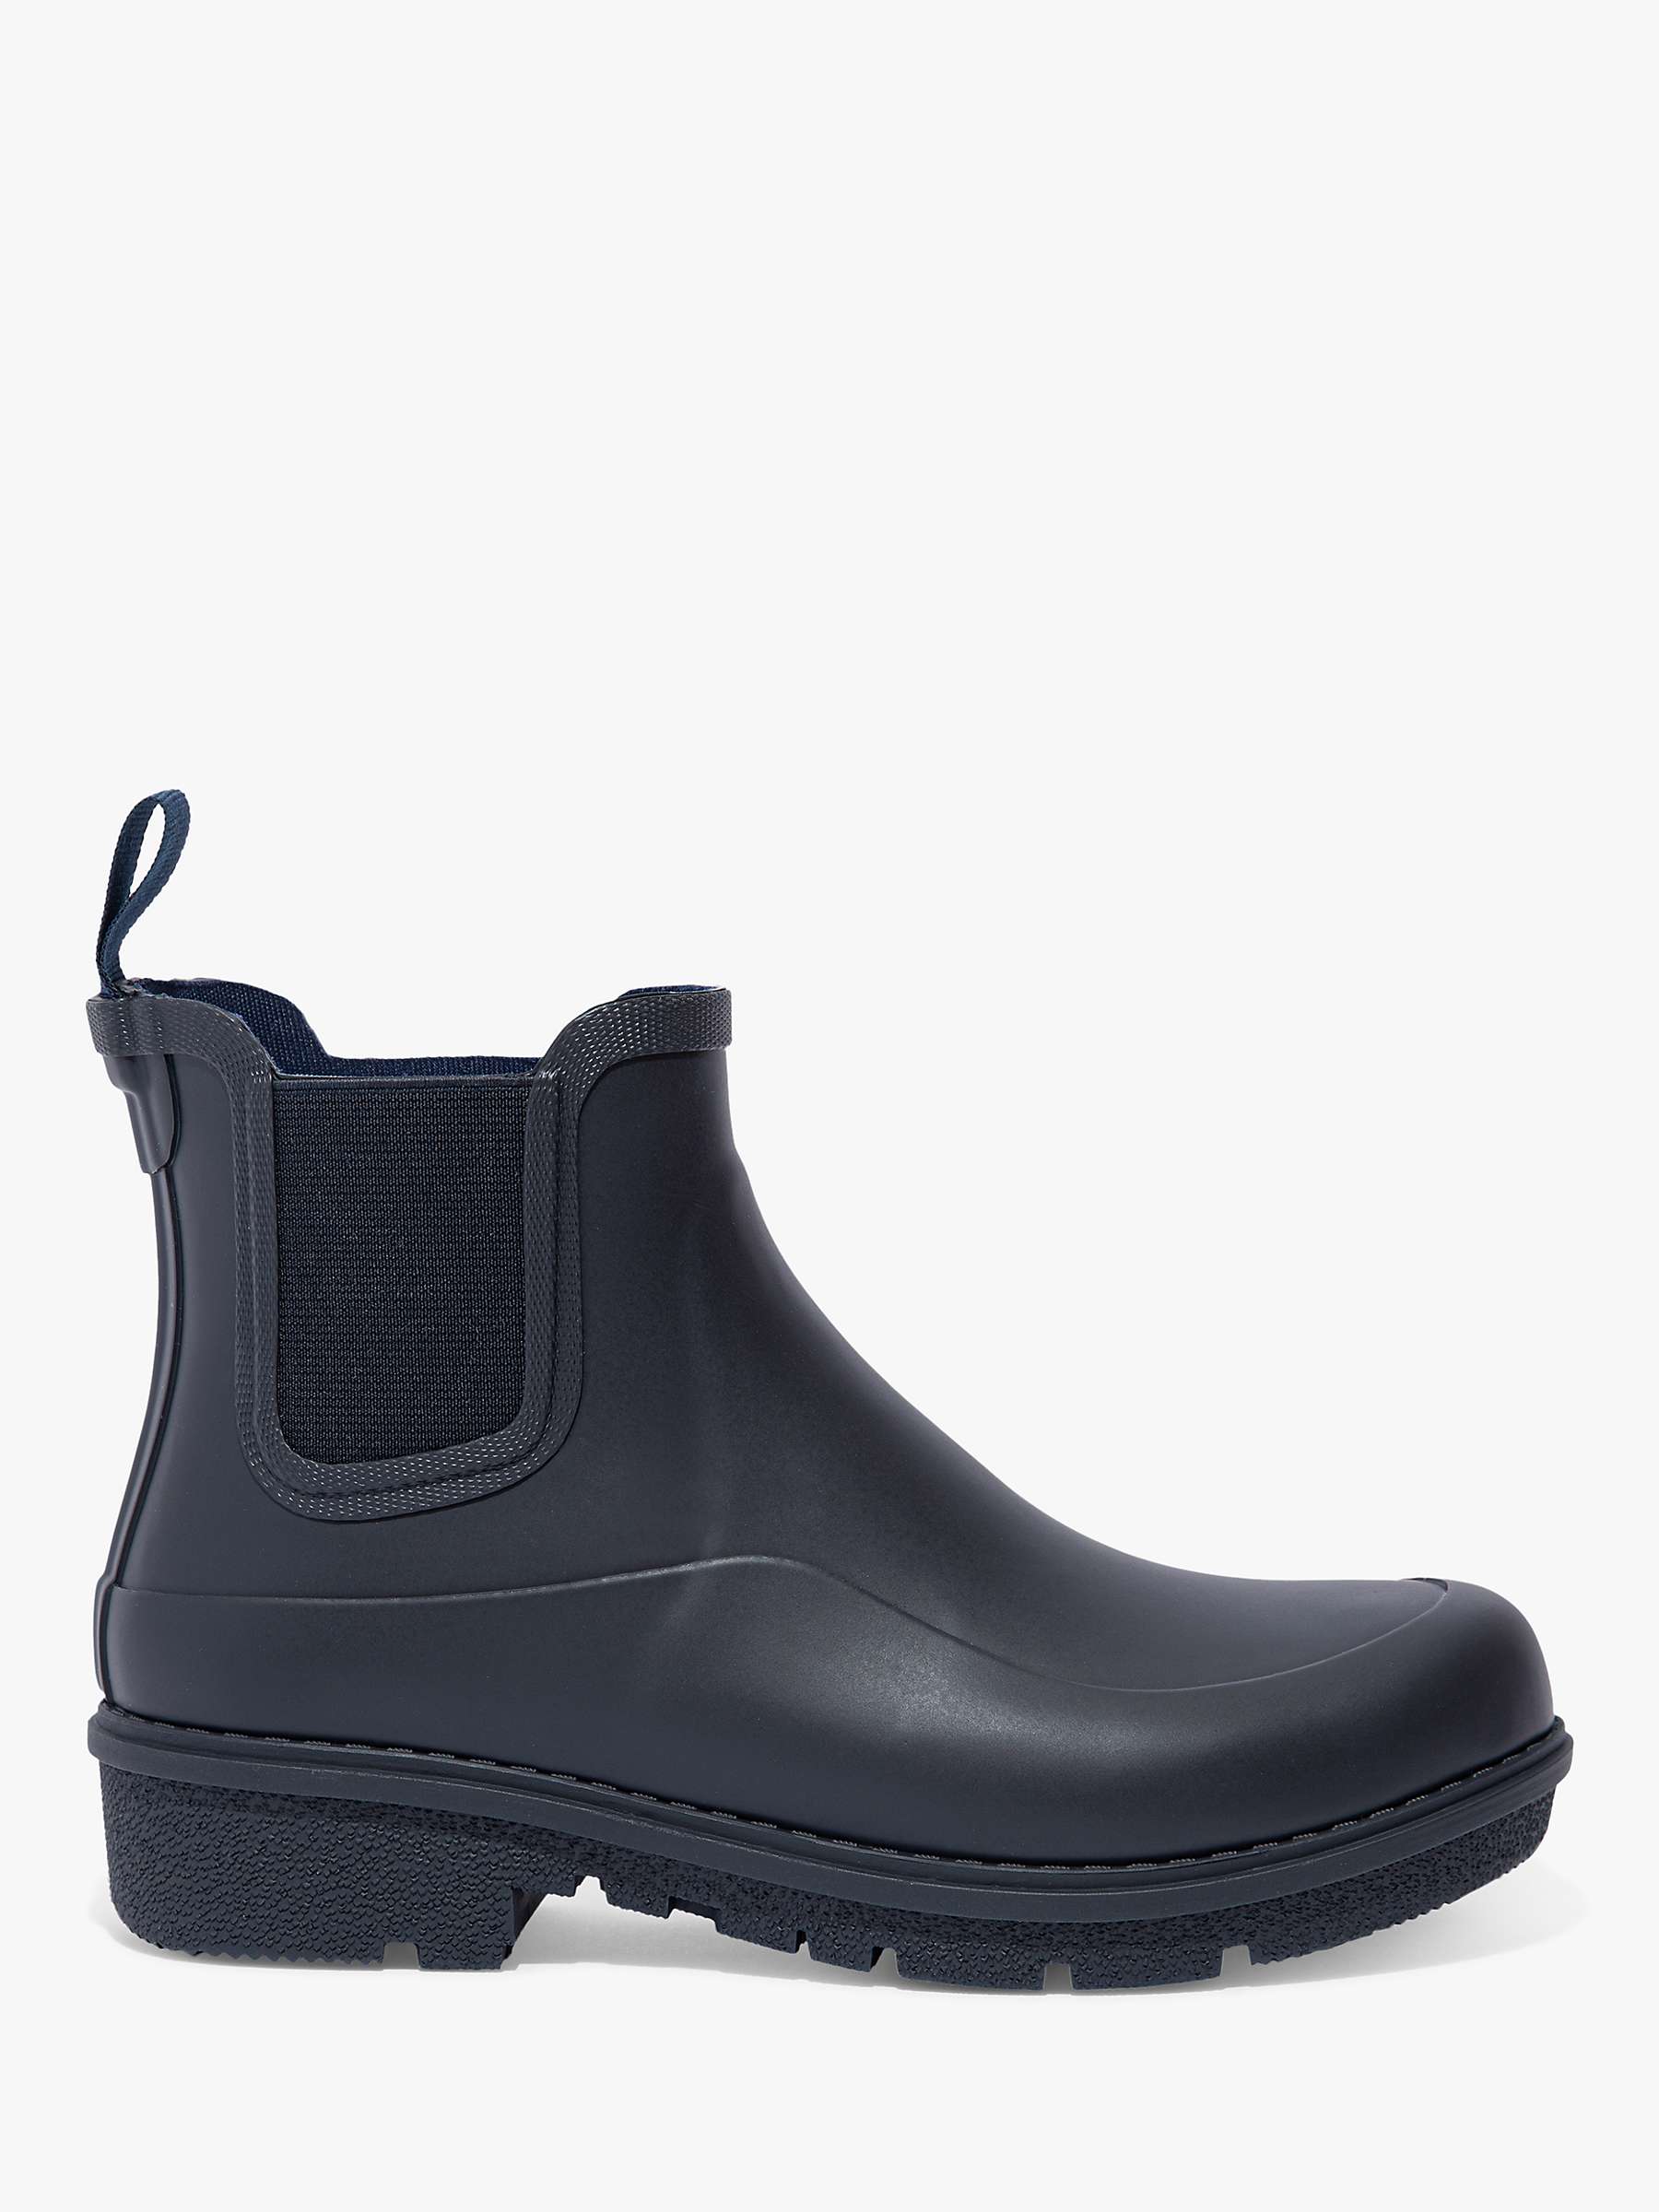 Buy FitFlop WonderWelly Short Chelsea Wellington Boots Online at johnlewis.com